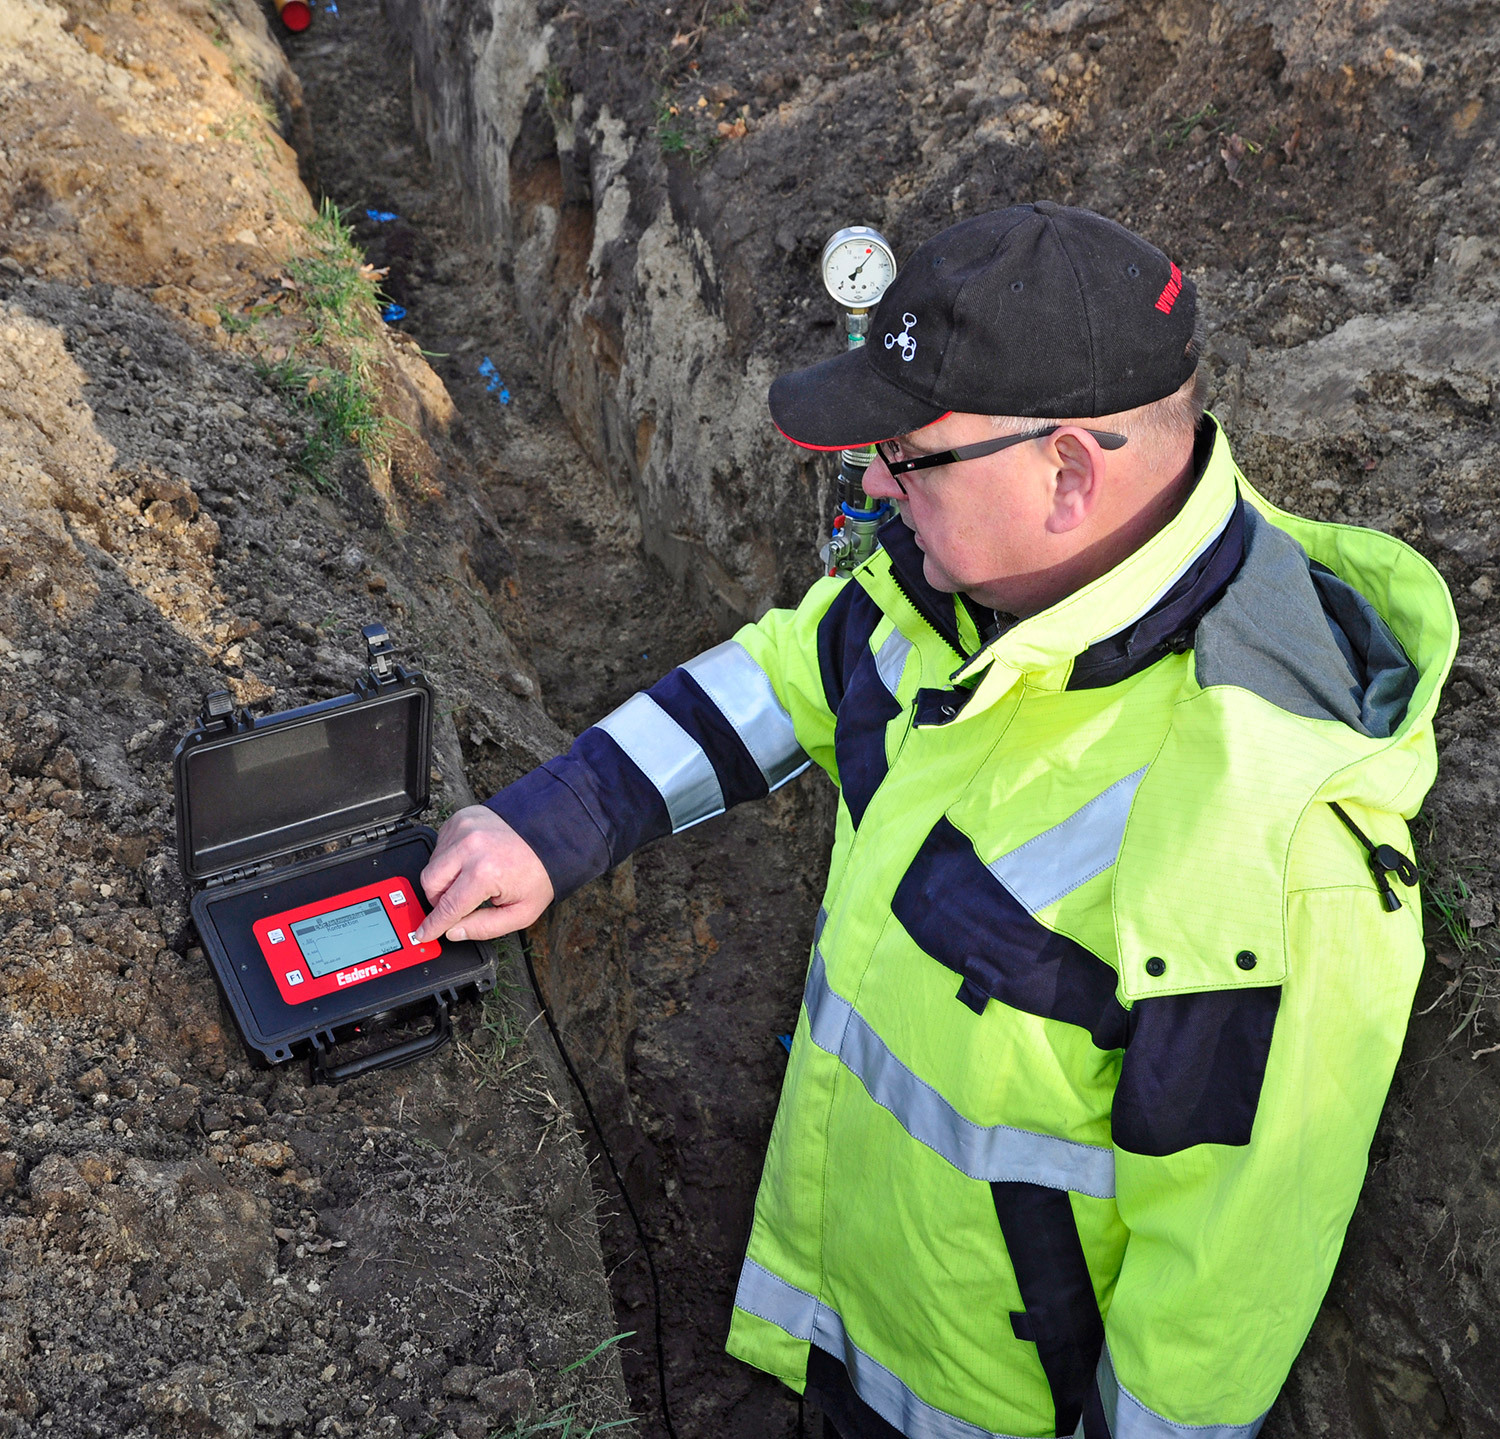 smart memo pressure testing at a construction site with our colleague Olaf